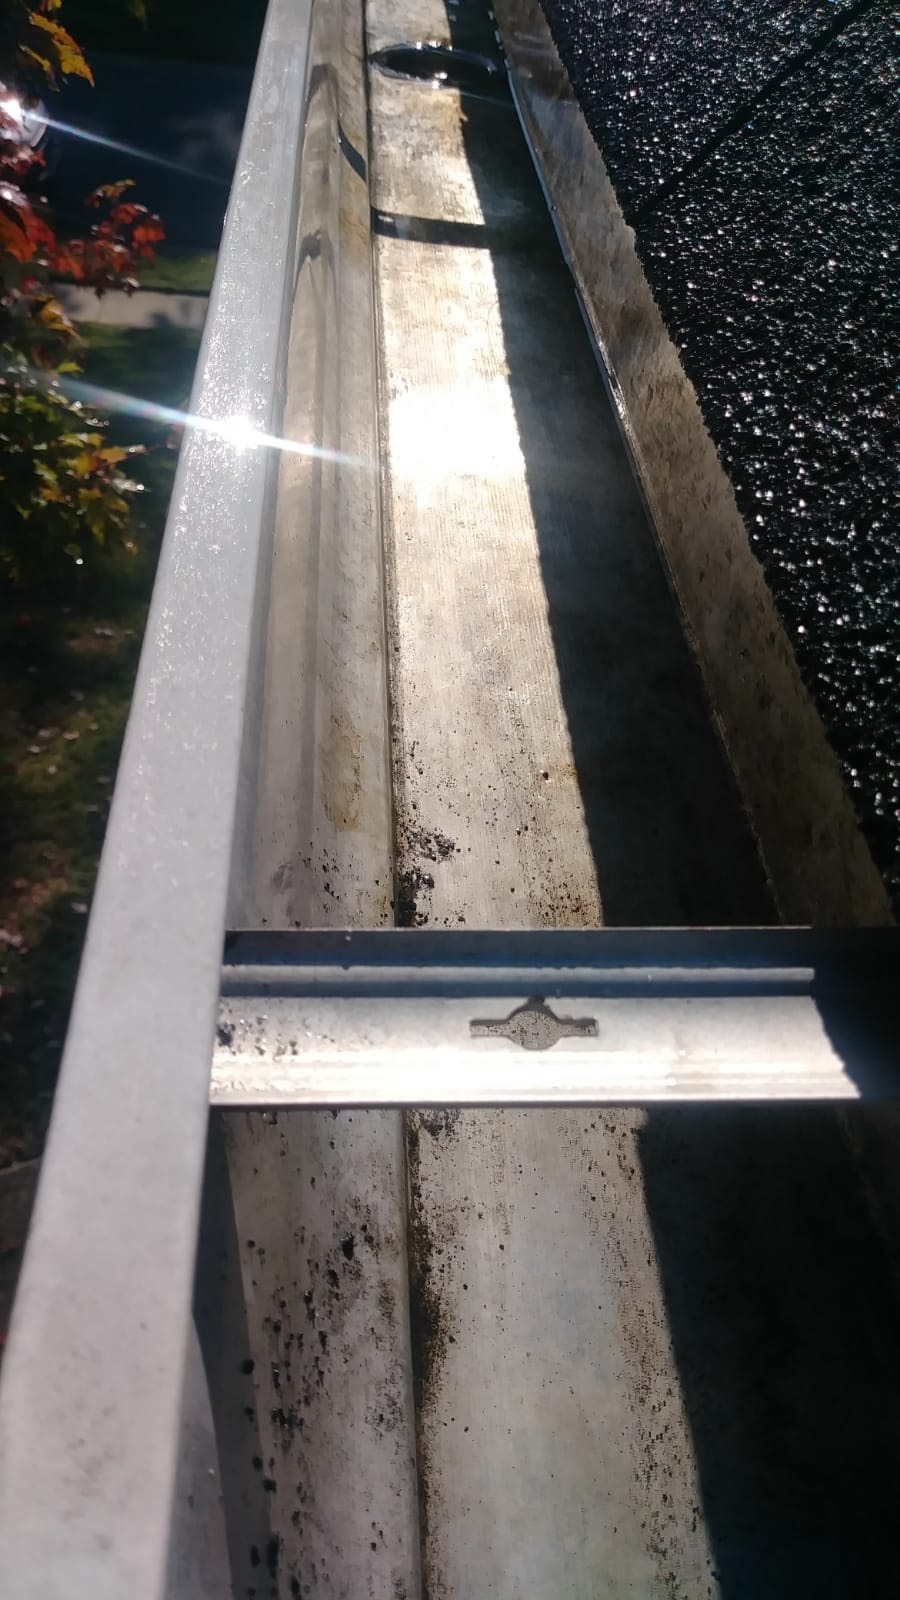 gutter cleaning system